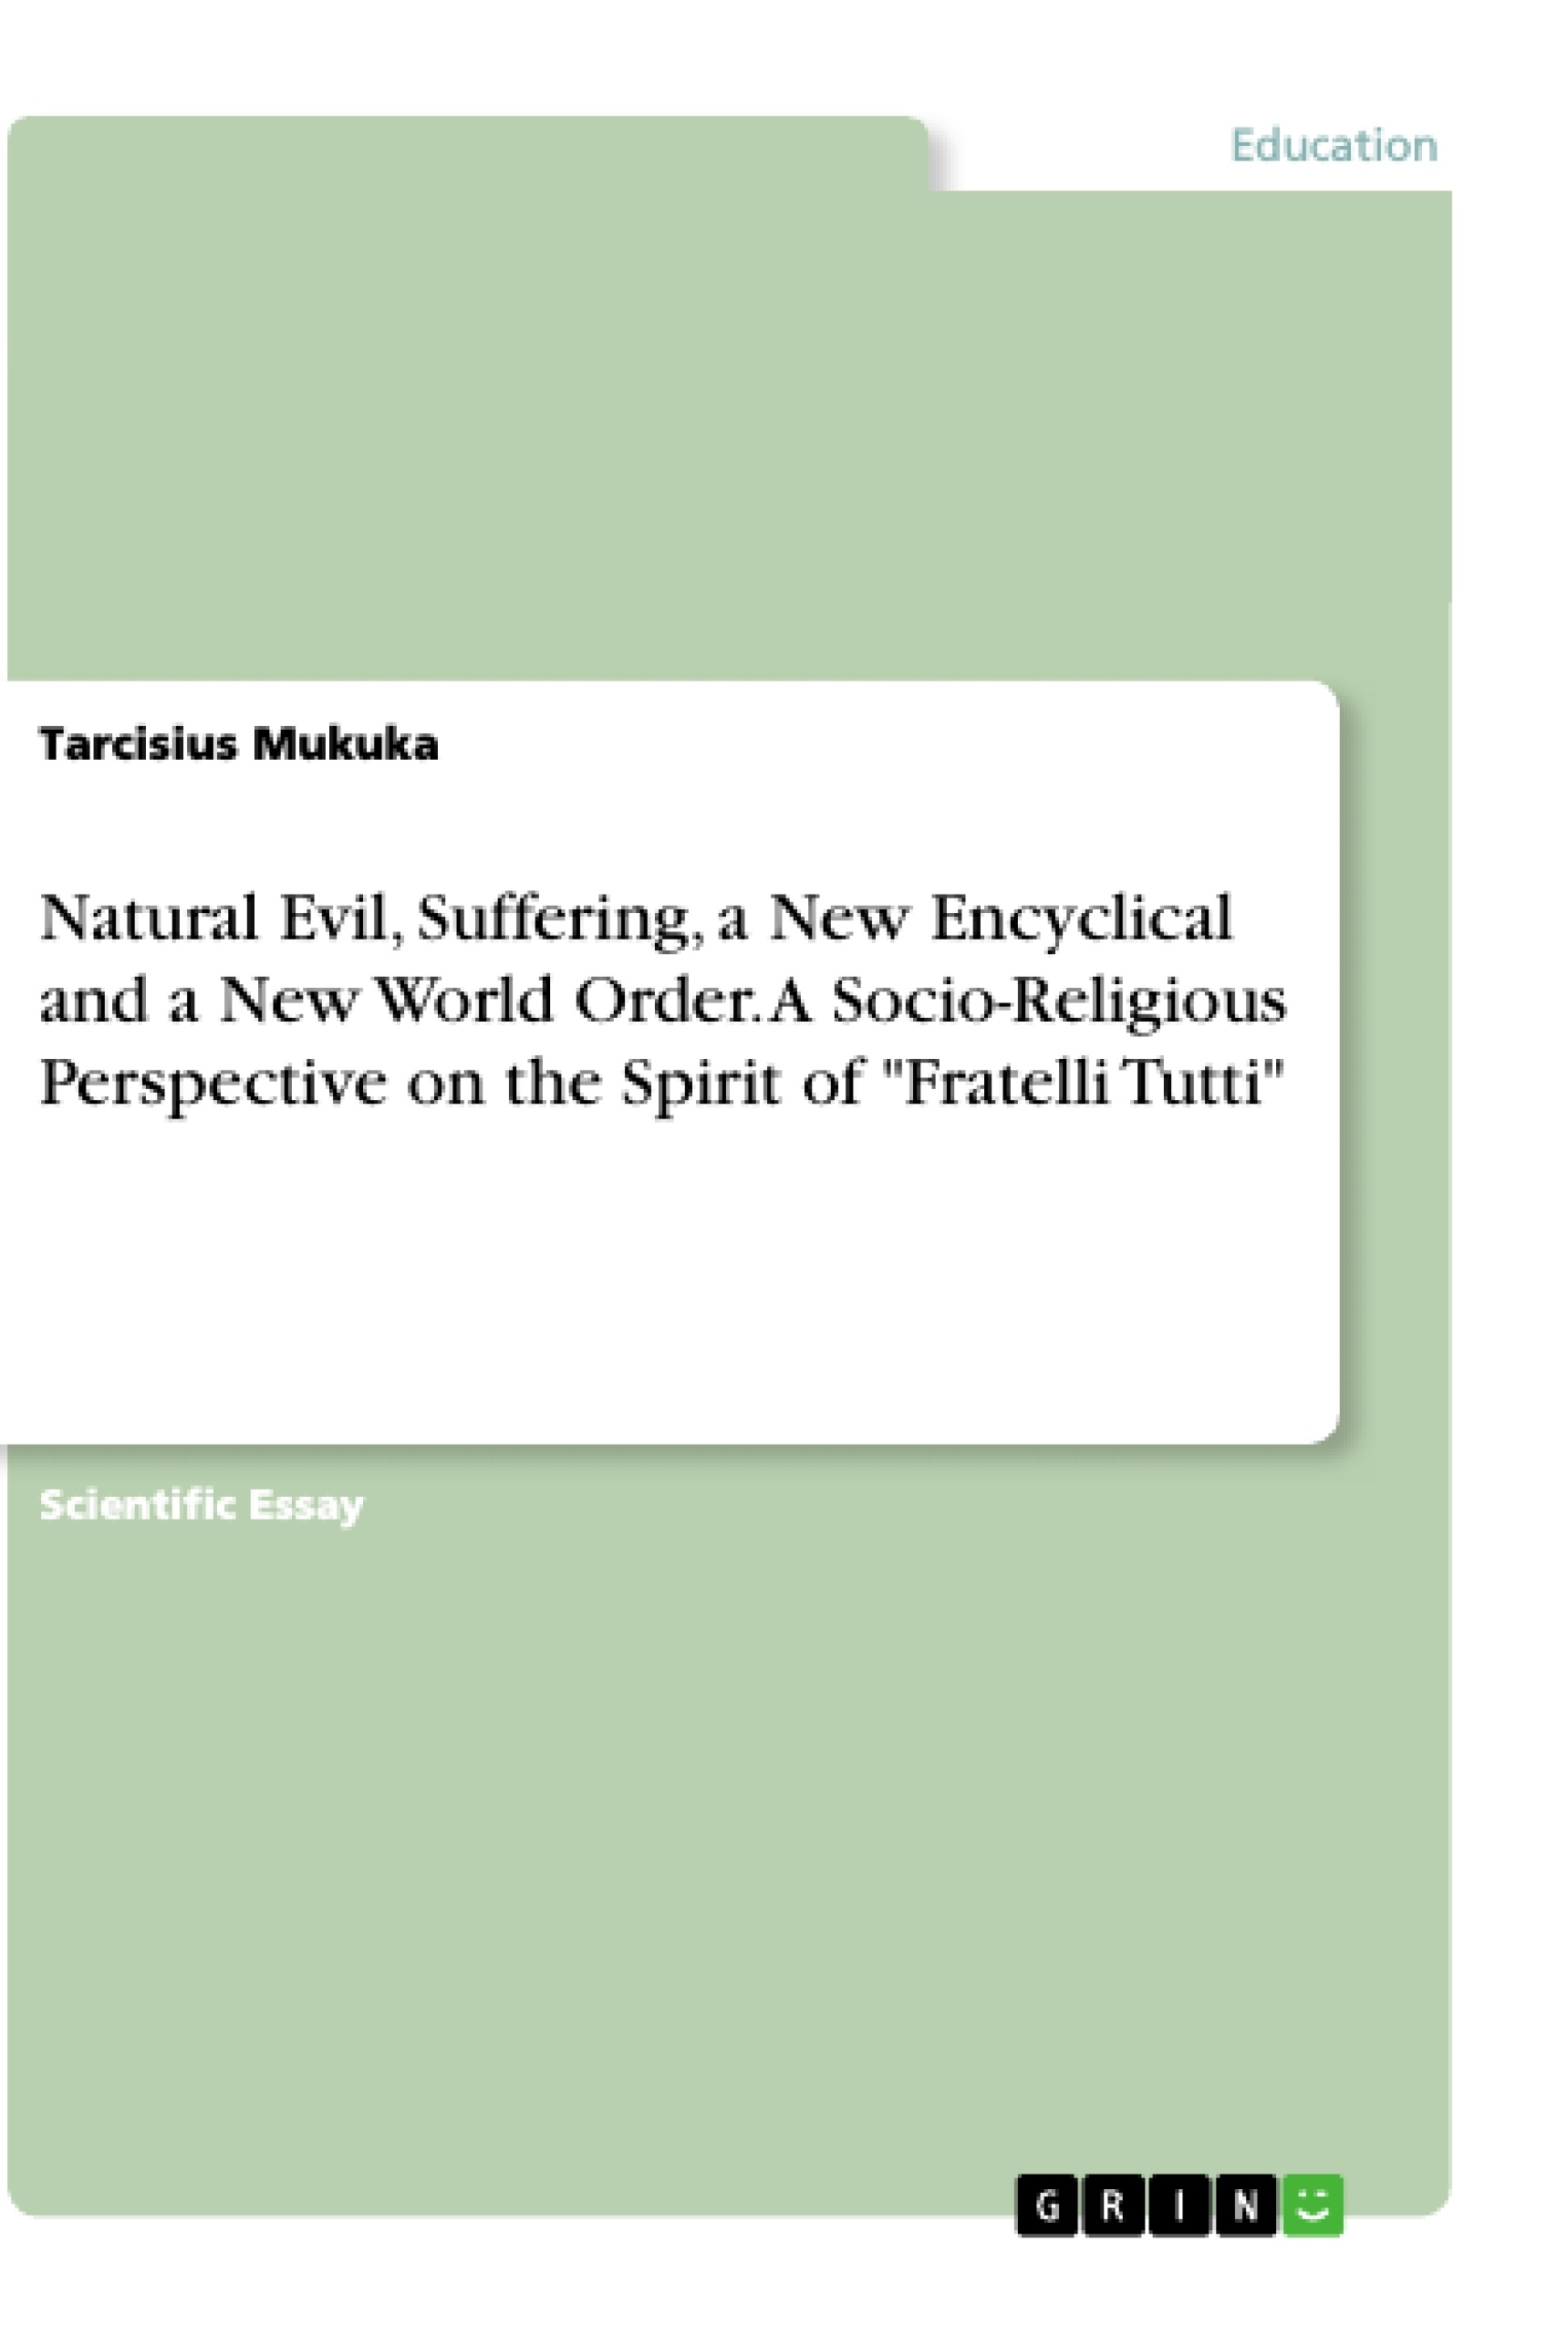 Title: Natural Evil, Suffering, a New Encyclical and a New World Order. A Socio-Religious Perspective on the Spirit of "Fratelli Tutti"